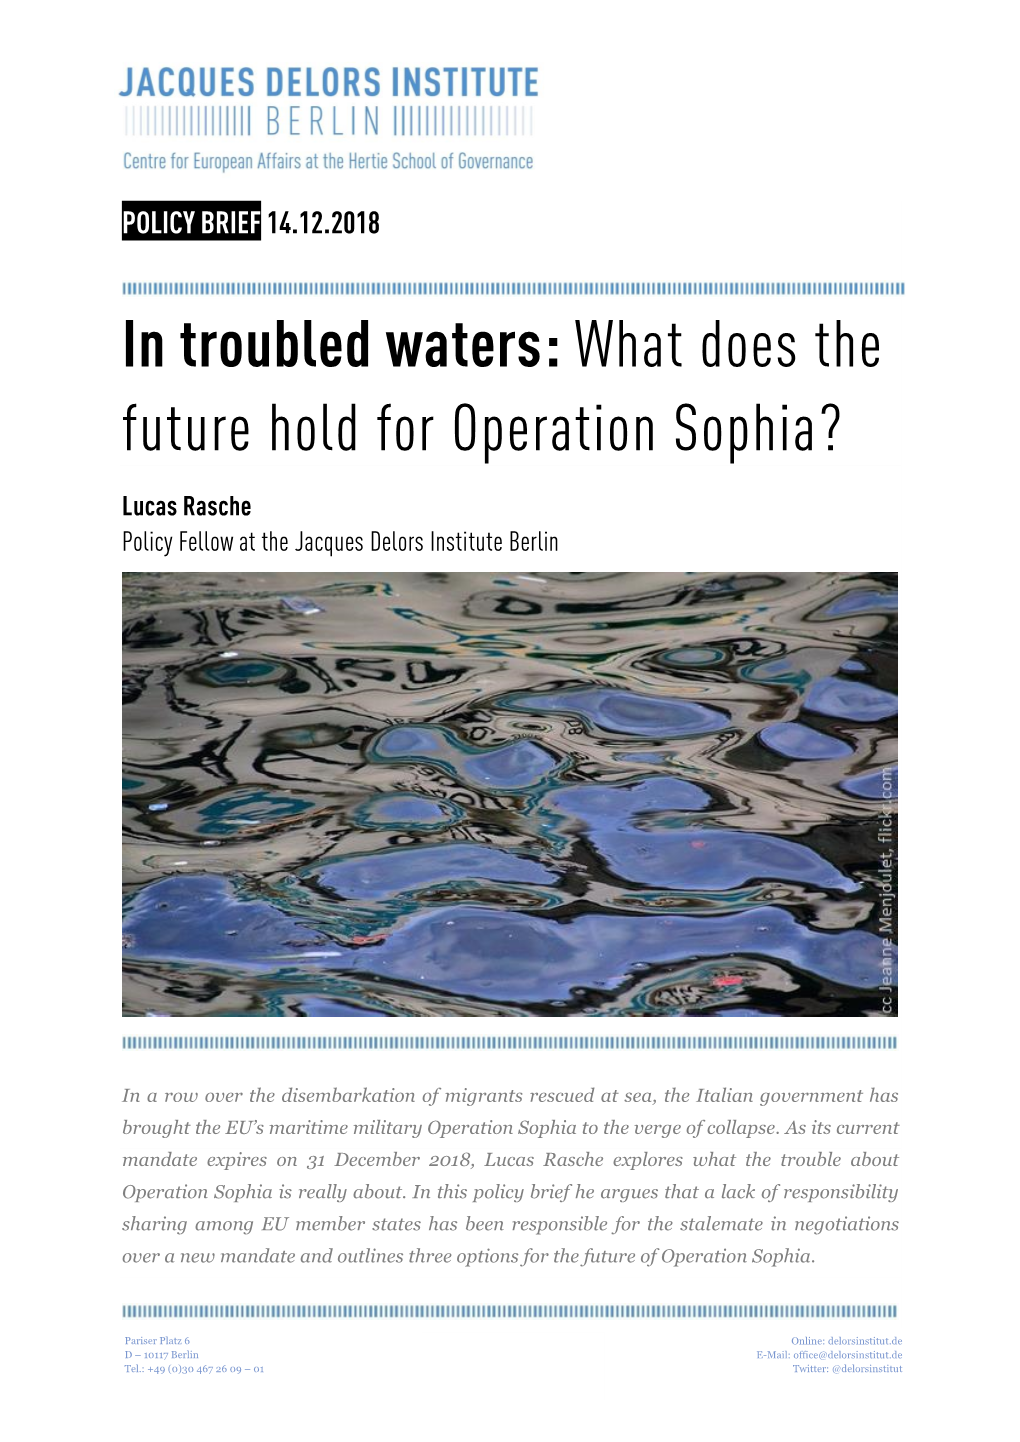 In Troubled Waters: What Does the Future Hold for Operation Sophia?